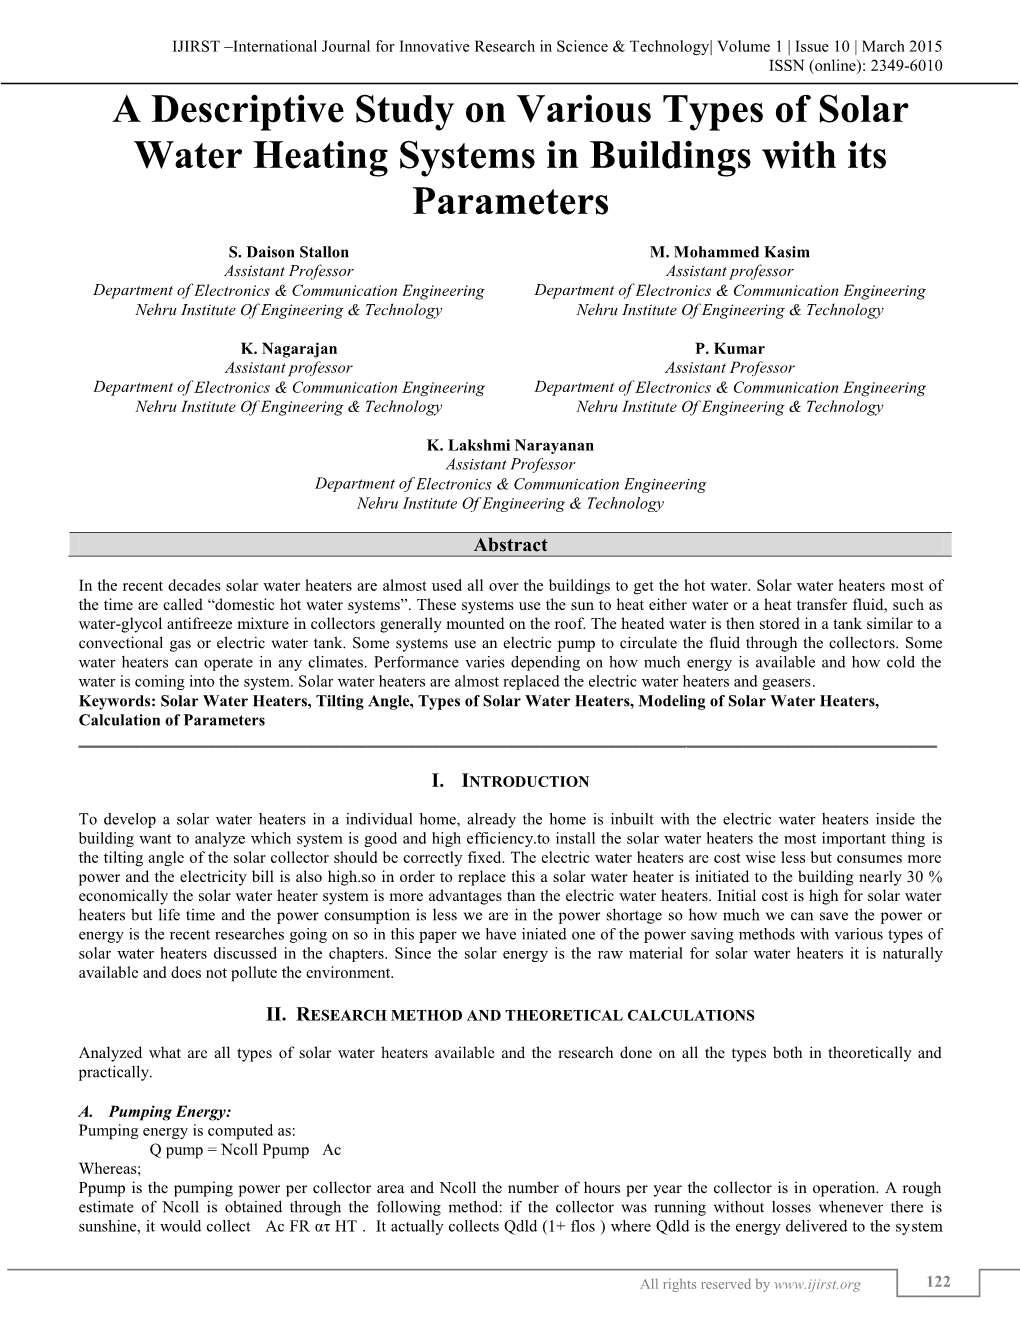 A Descriptive Study on Various Types of Solar Water Heating Systems in Buildings with Its Parameters